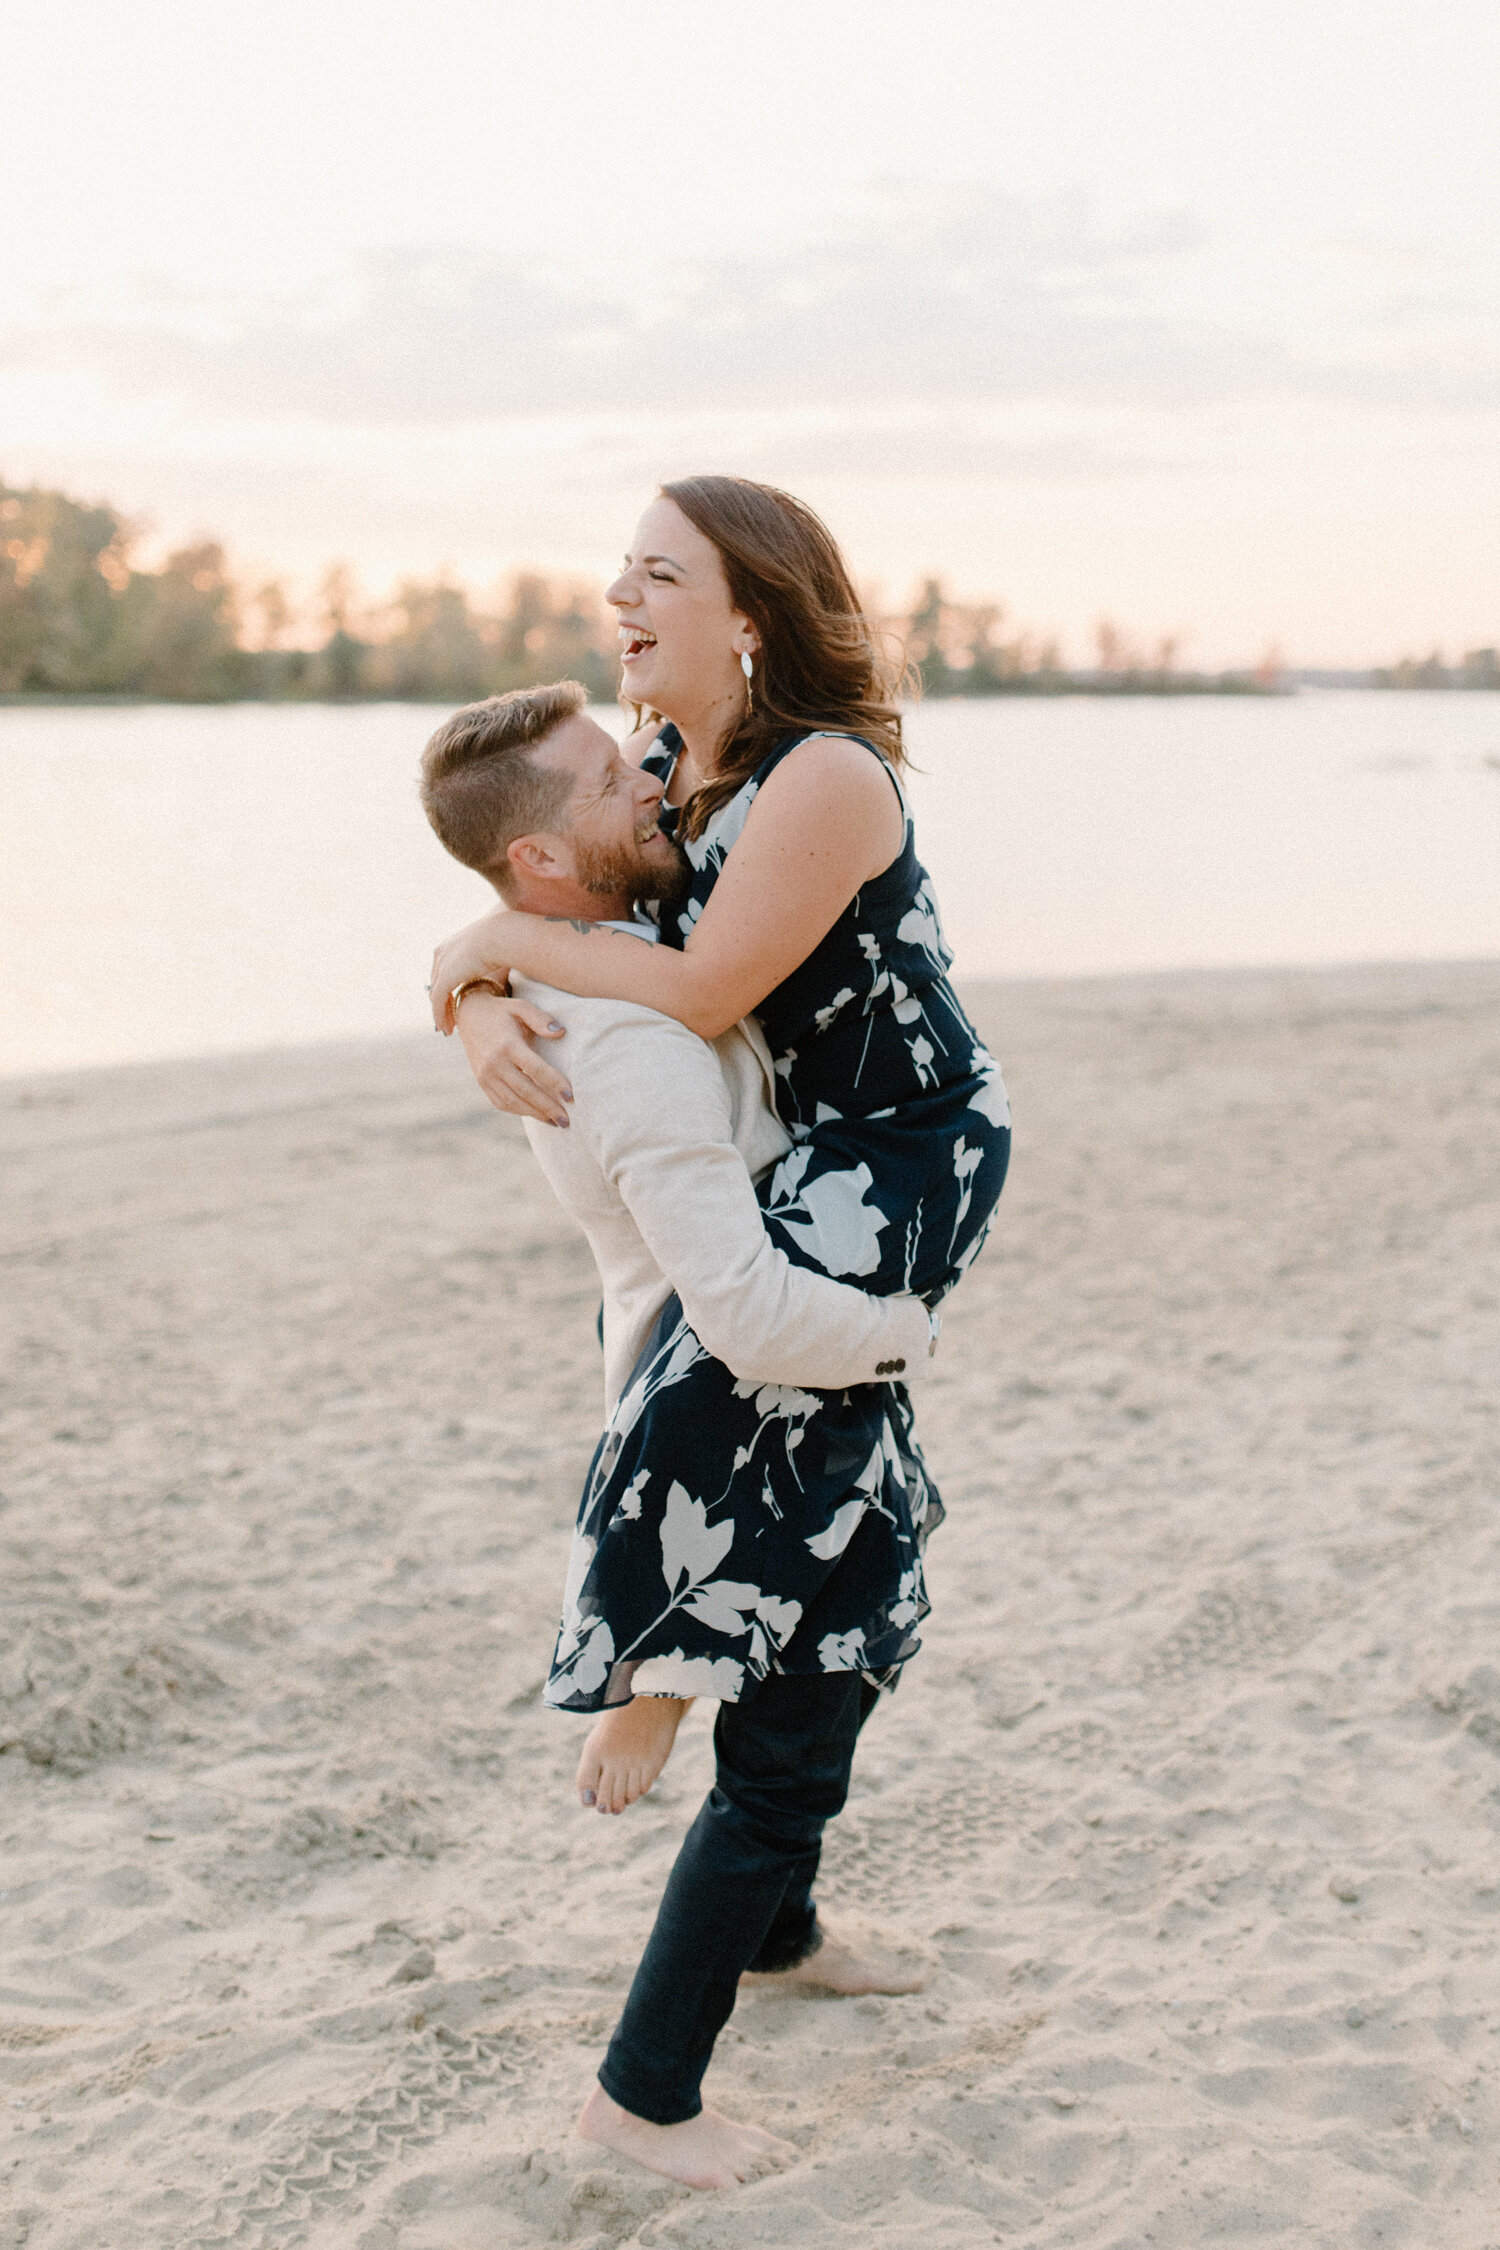  Chelsea Mason Photography captures this woman laughing while her fiance picks her up and runs along the beach shore in Ottawa, Canada. Beach ottawa canada engagement session, photographer ontario canada, formal beach outfits, laughing playful engage